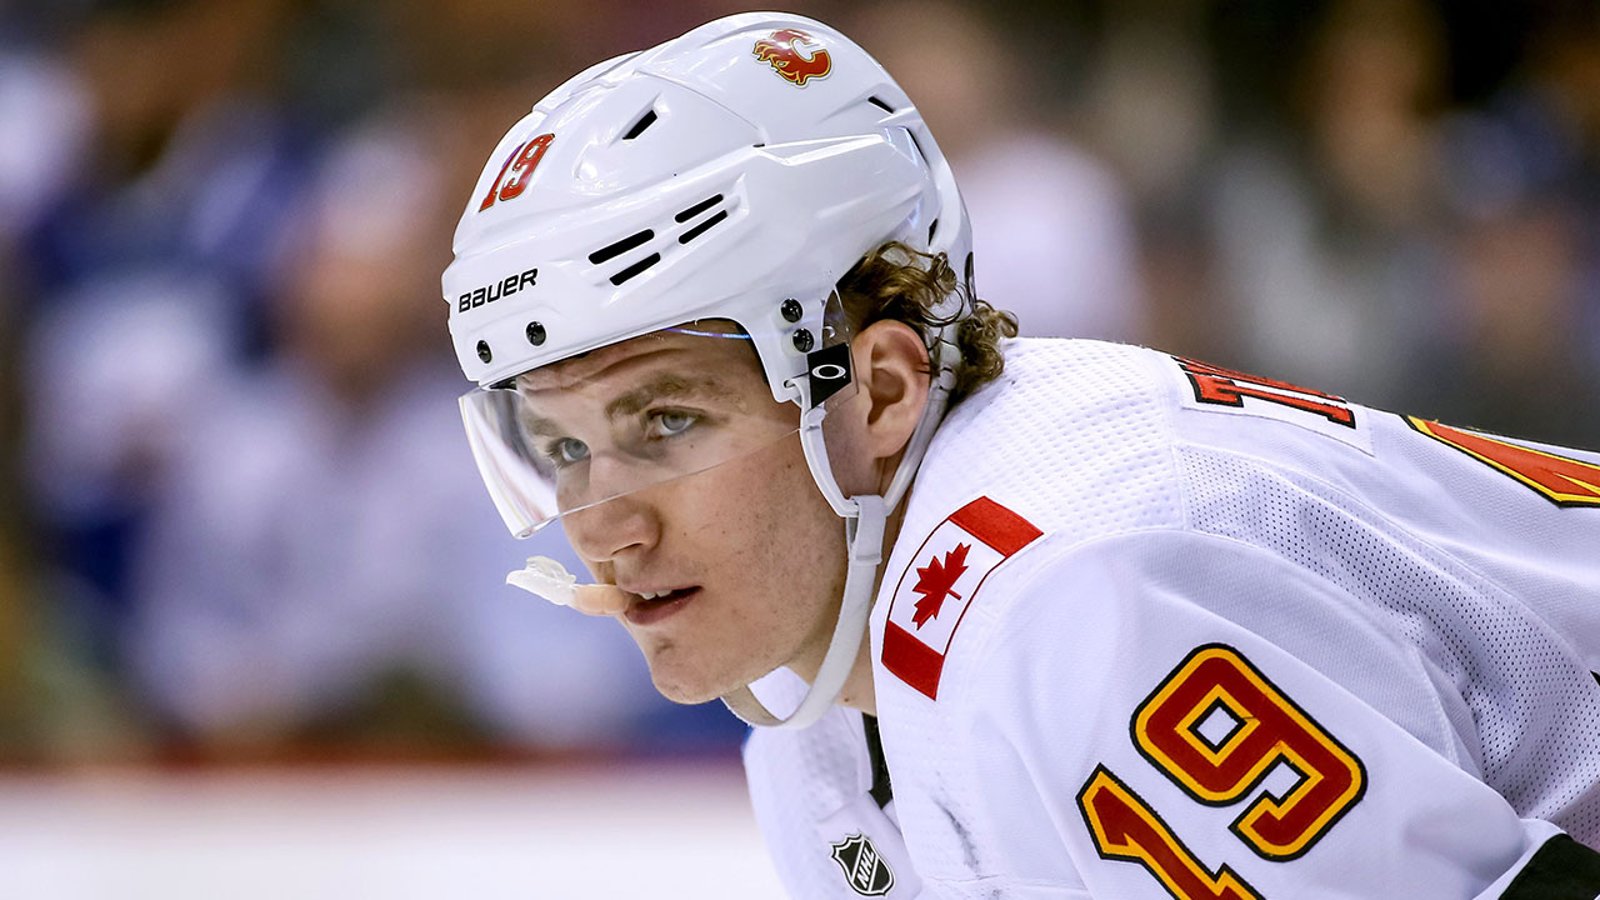 Flames’ Tkachuk joins another team while awaiting contract resolution